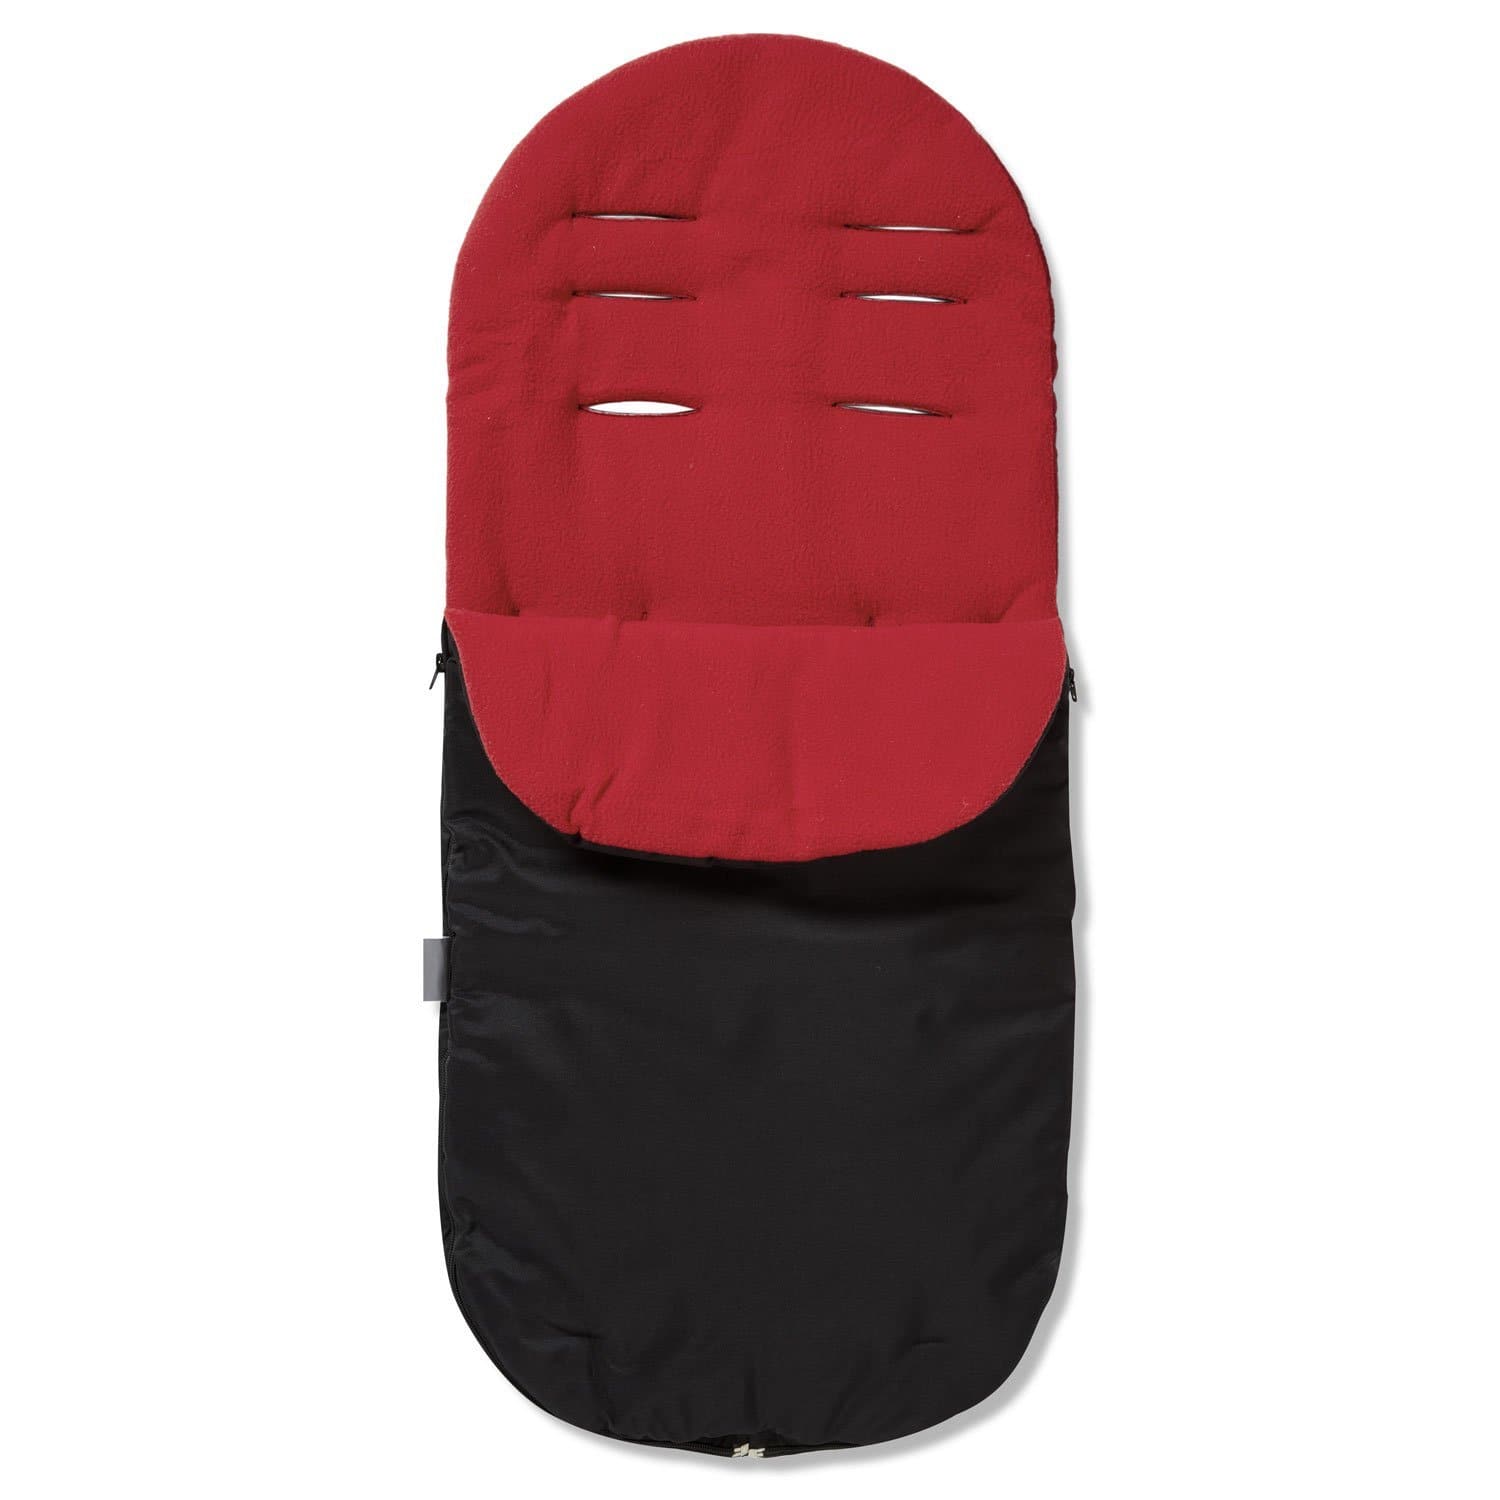 Footmuff / Cosy Toes Compatible with Quinny - Red / Fits All Models | For Your Little One